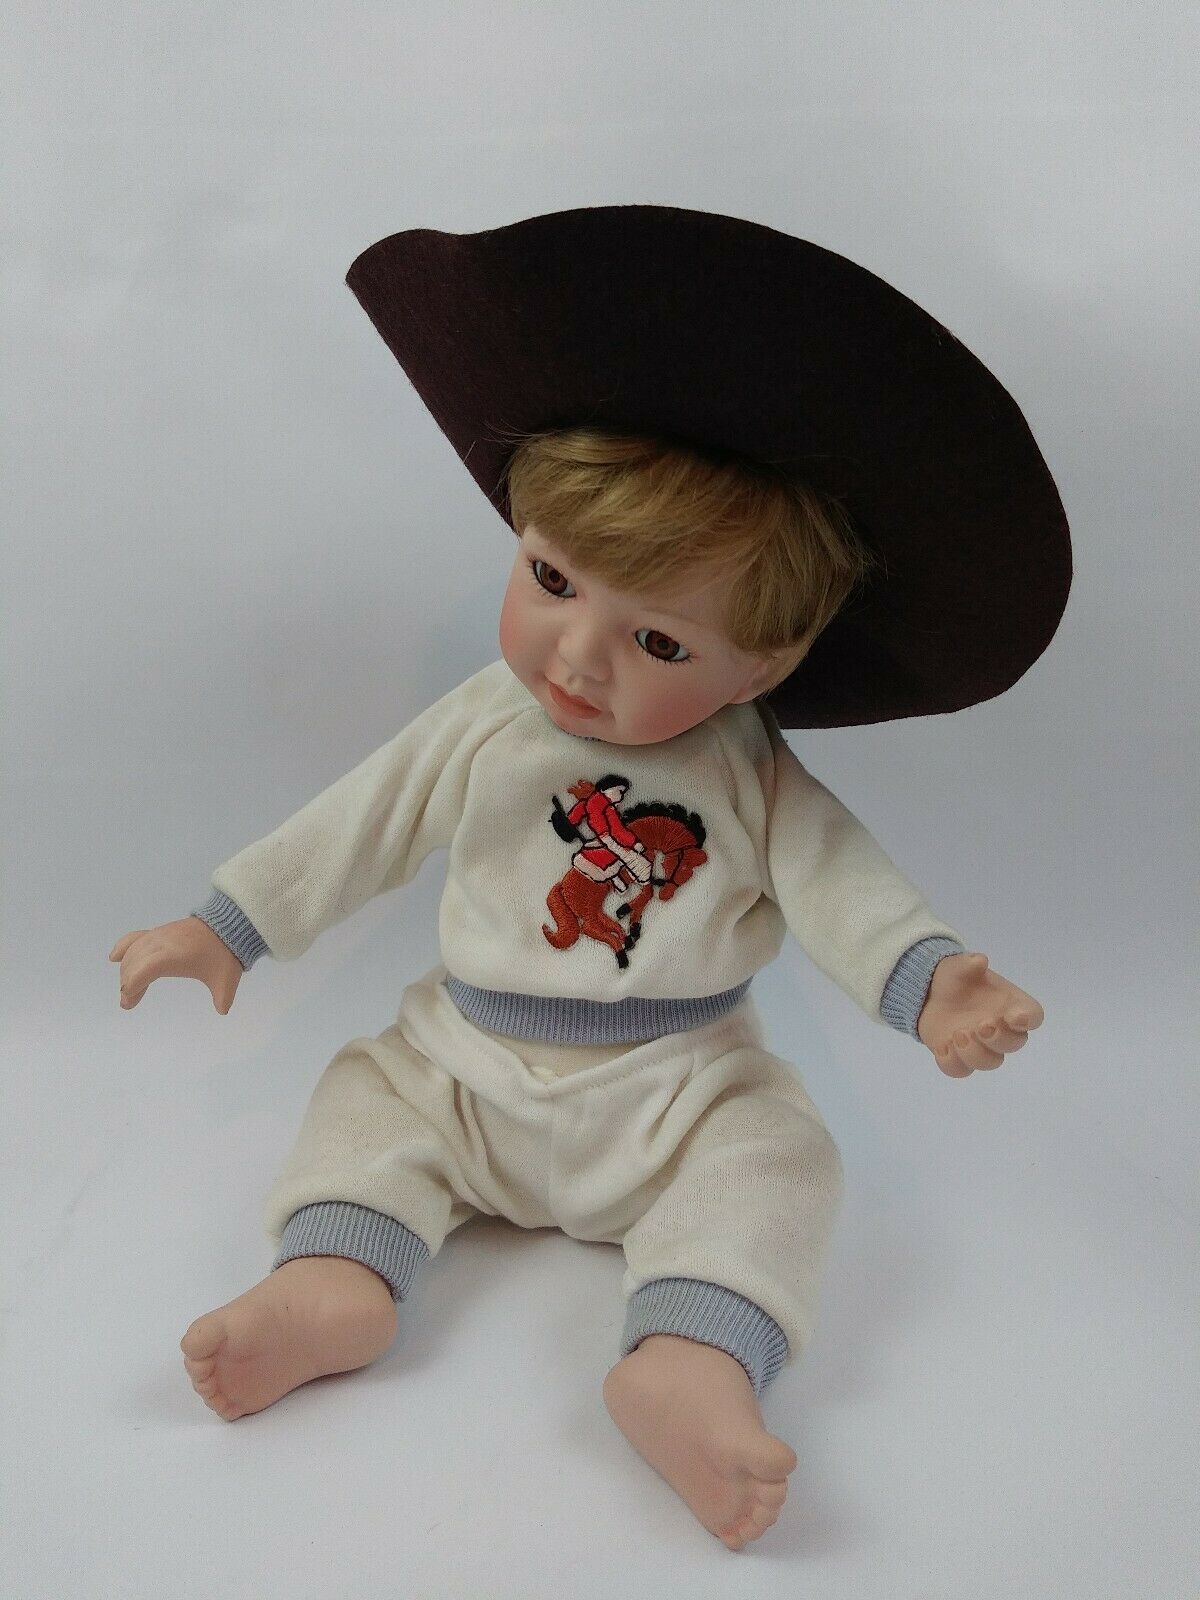 Mbi L Steele Blonde Boy Baby Doll Porcelain W/brown Hat Collectible 1992